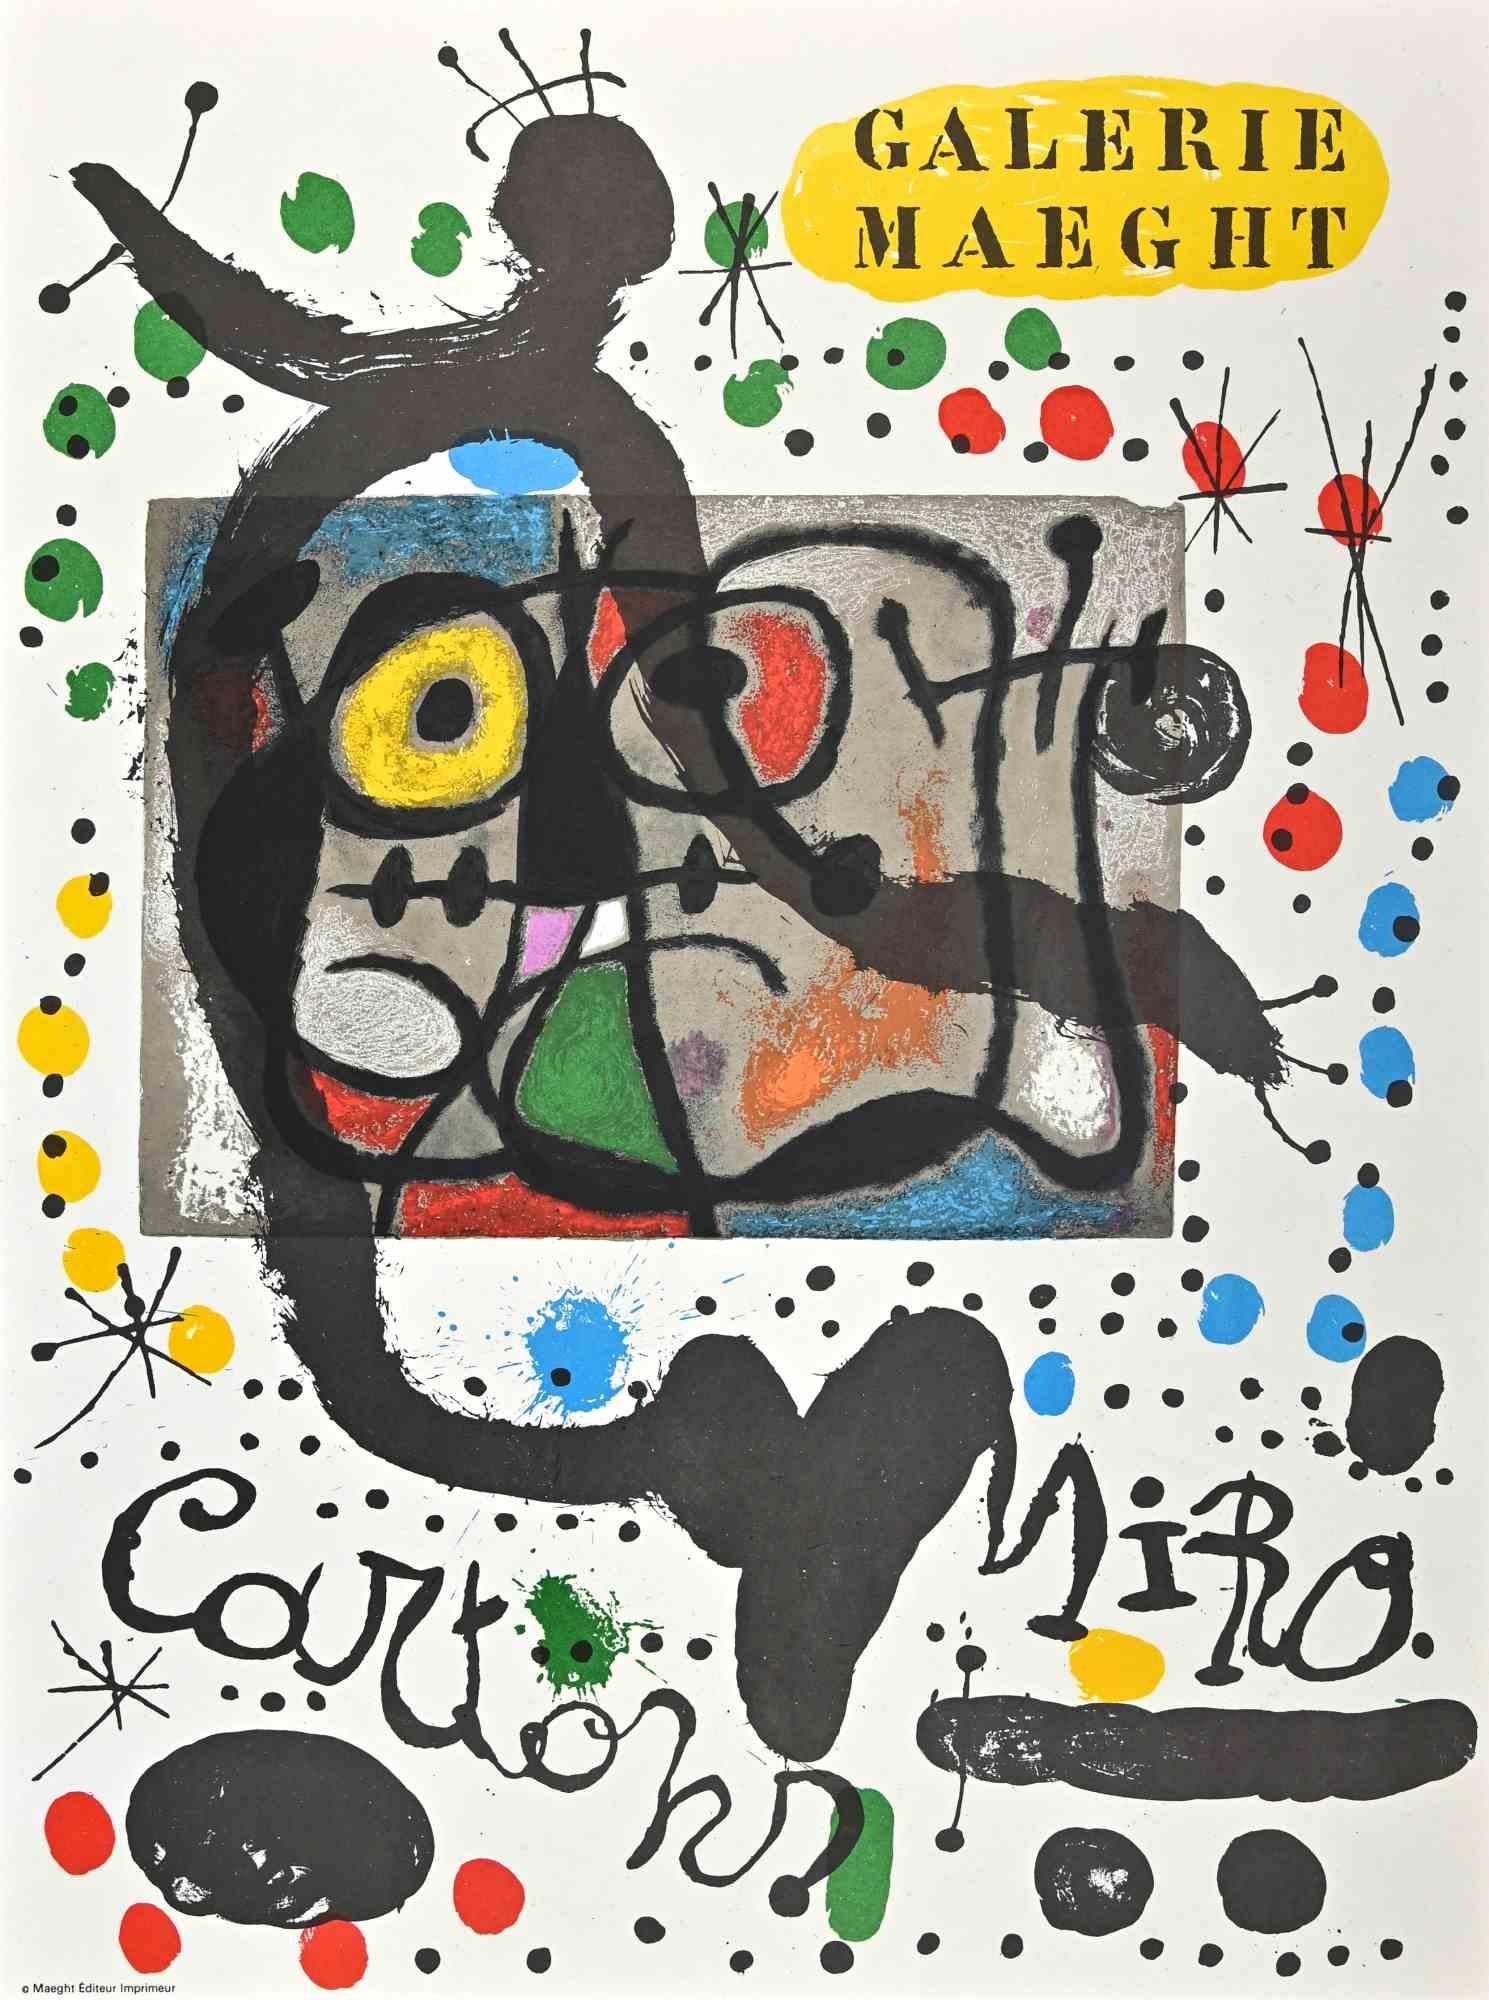 Unknown Abstract Print - Vintage Poster - Exhibition at Galerie Maeght - 1978